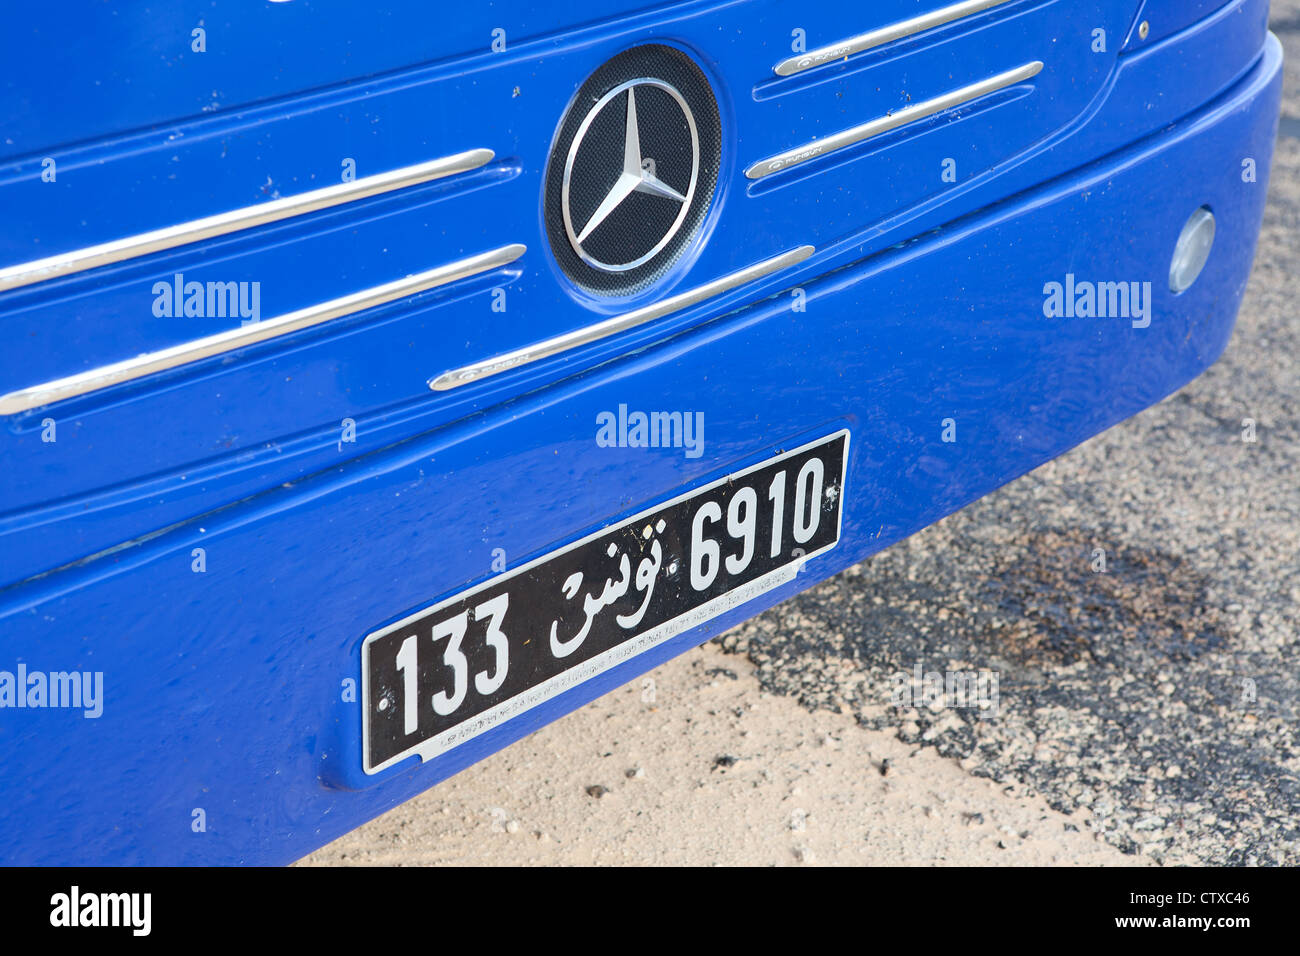 Tunisian license plate on the front of blue bus Mercedes Stock Photo - Alamy